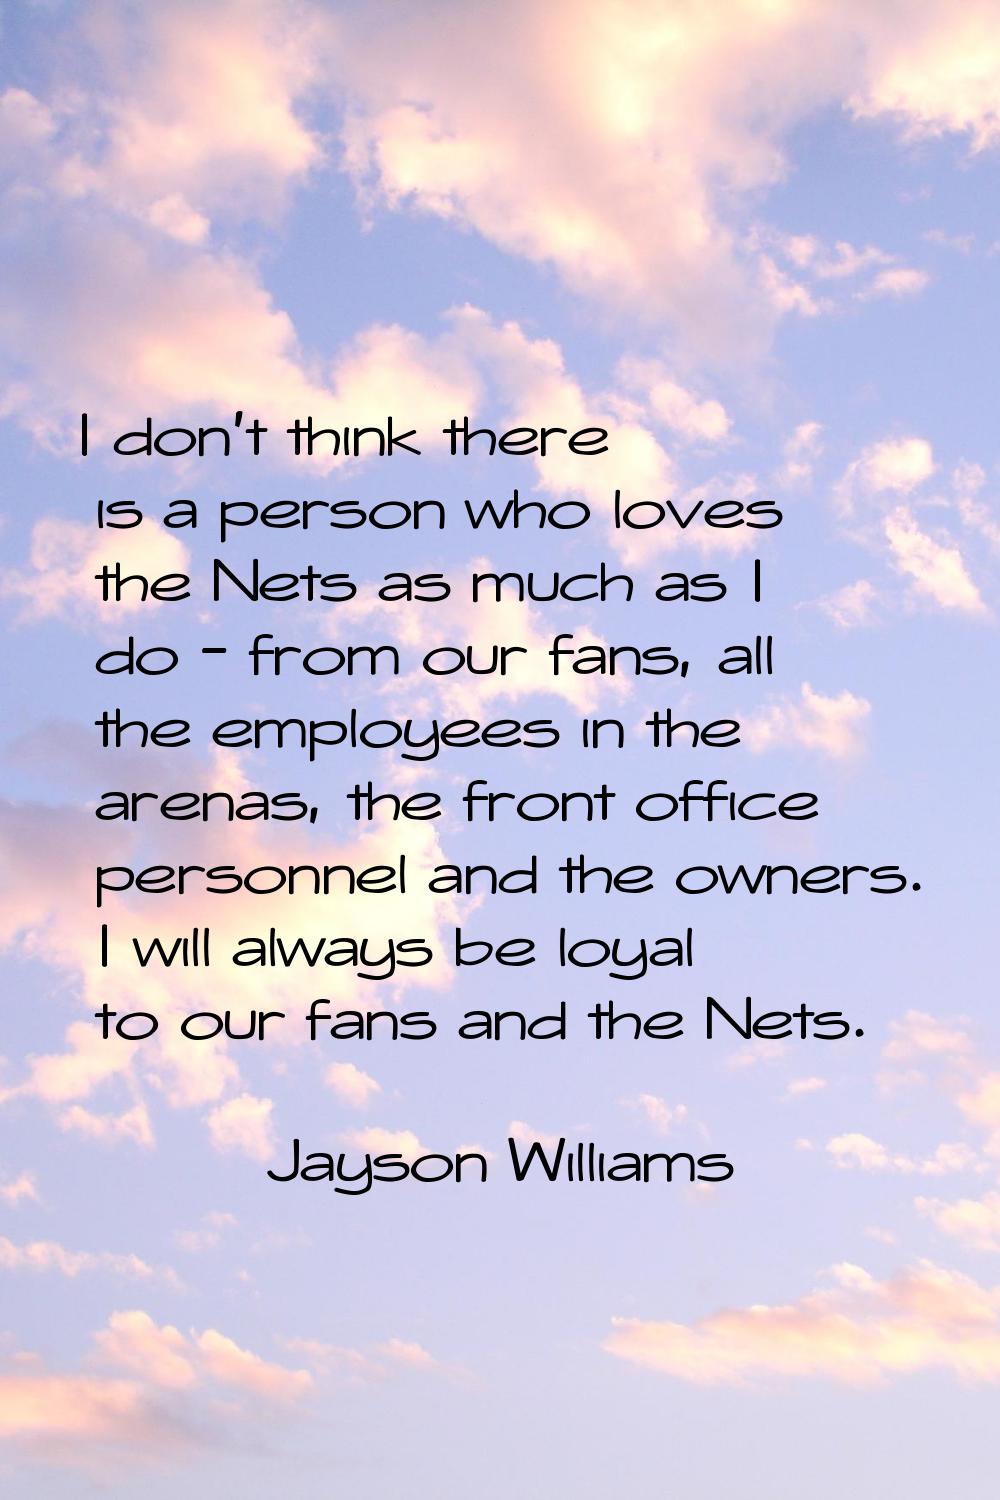 I don't think there is a person who loves the Nets as much as I do - from our fans, all the employe